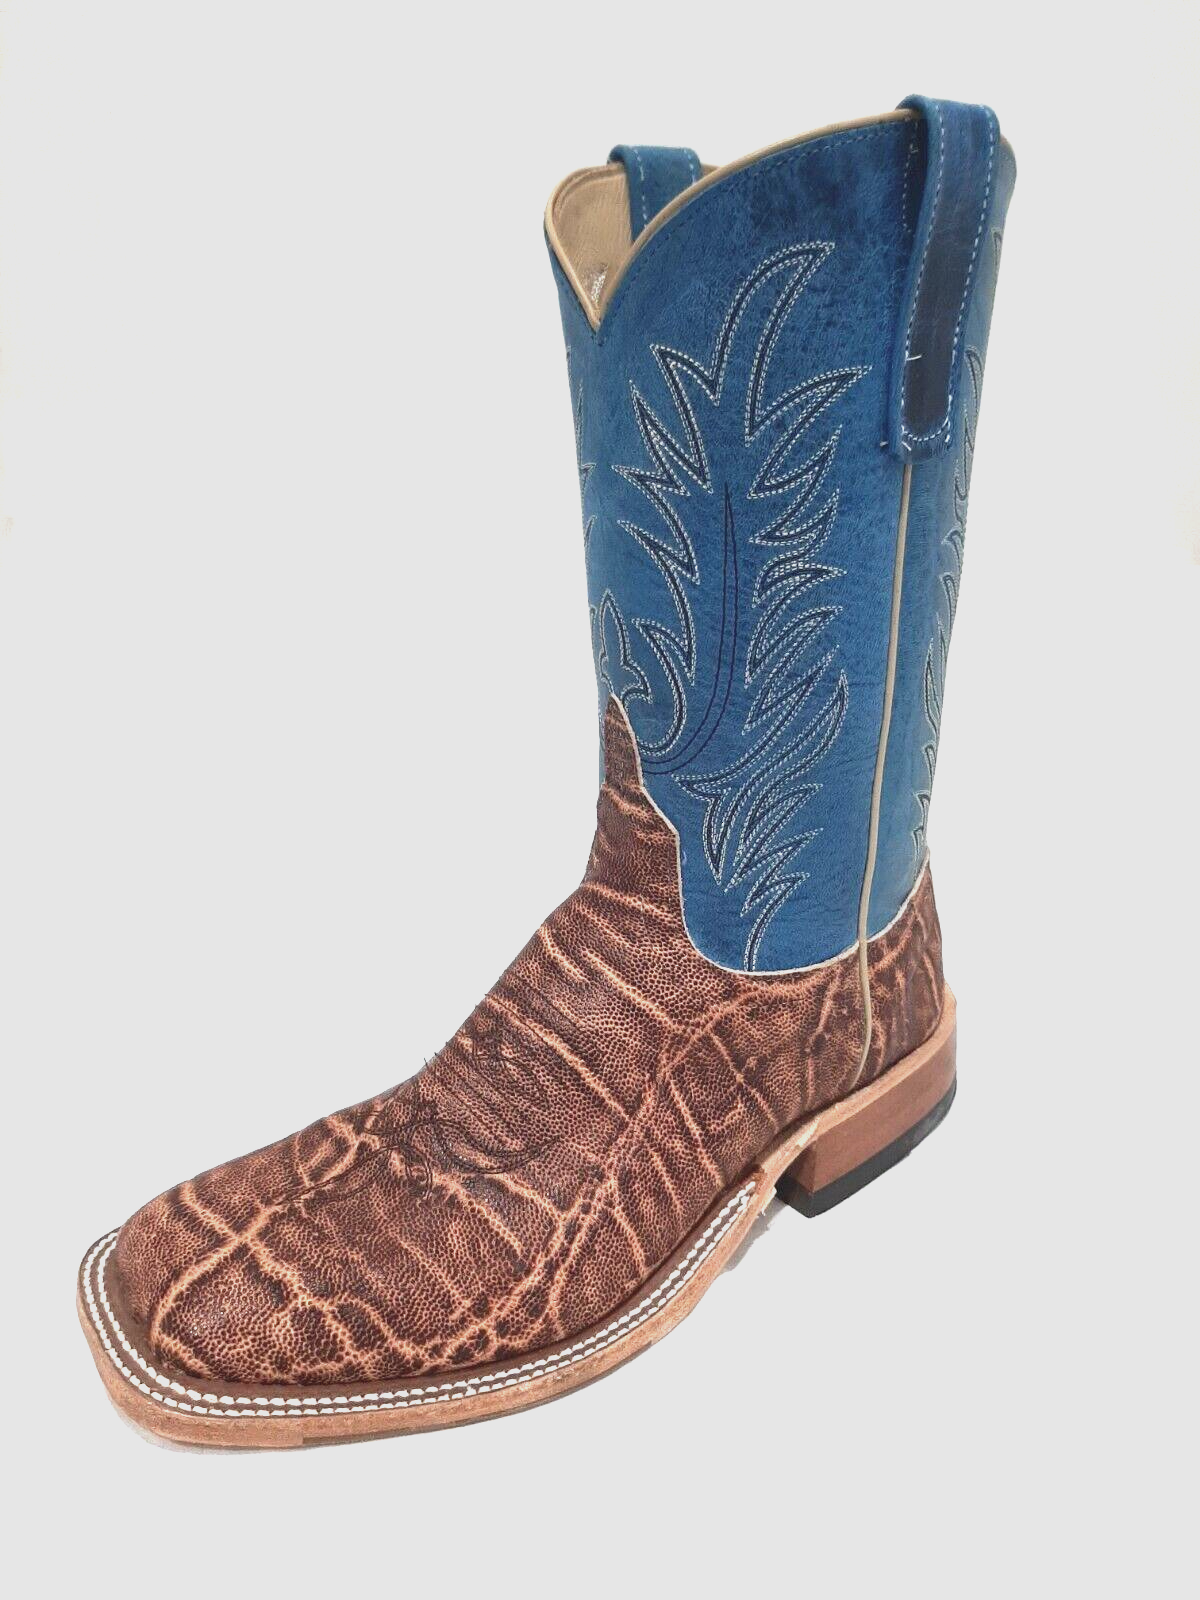 MEN'S ANDERSON BEAN EXOTIC WESTERN BOOTS EXCLUSIVES! 332656 ELEPHANT